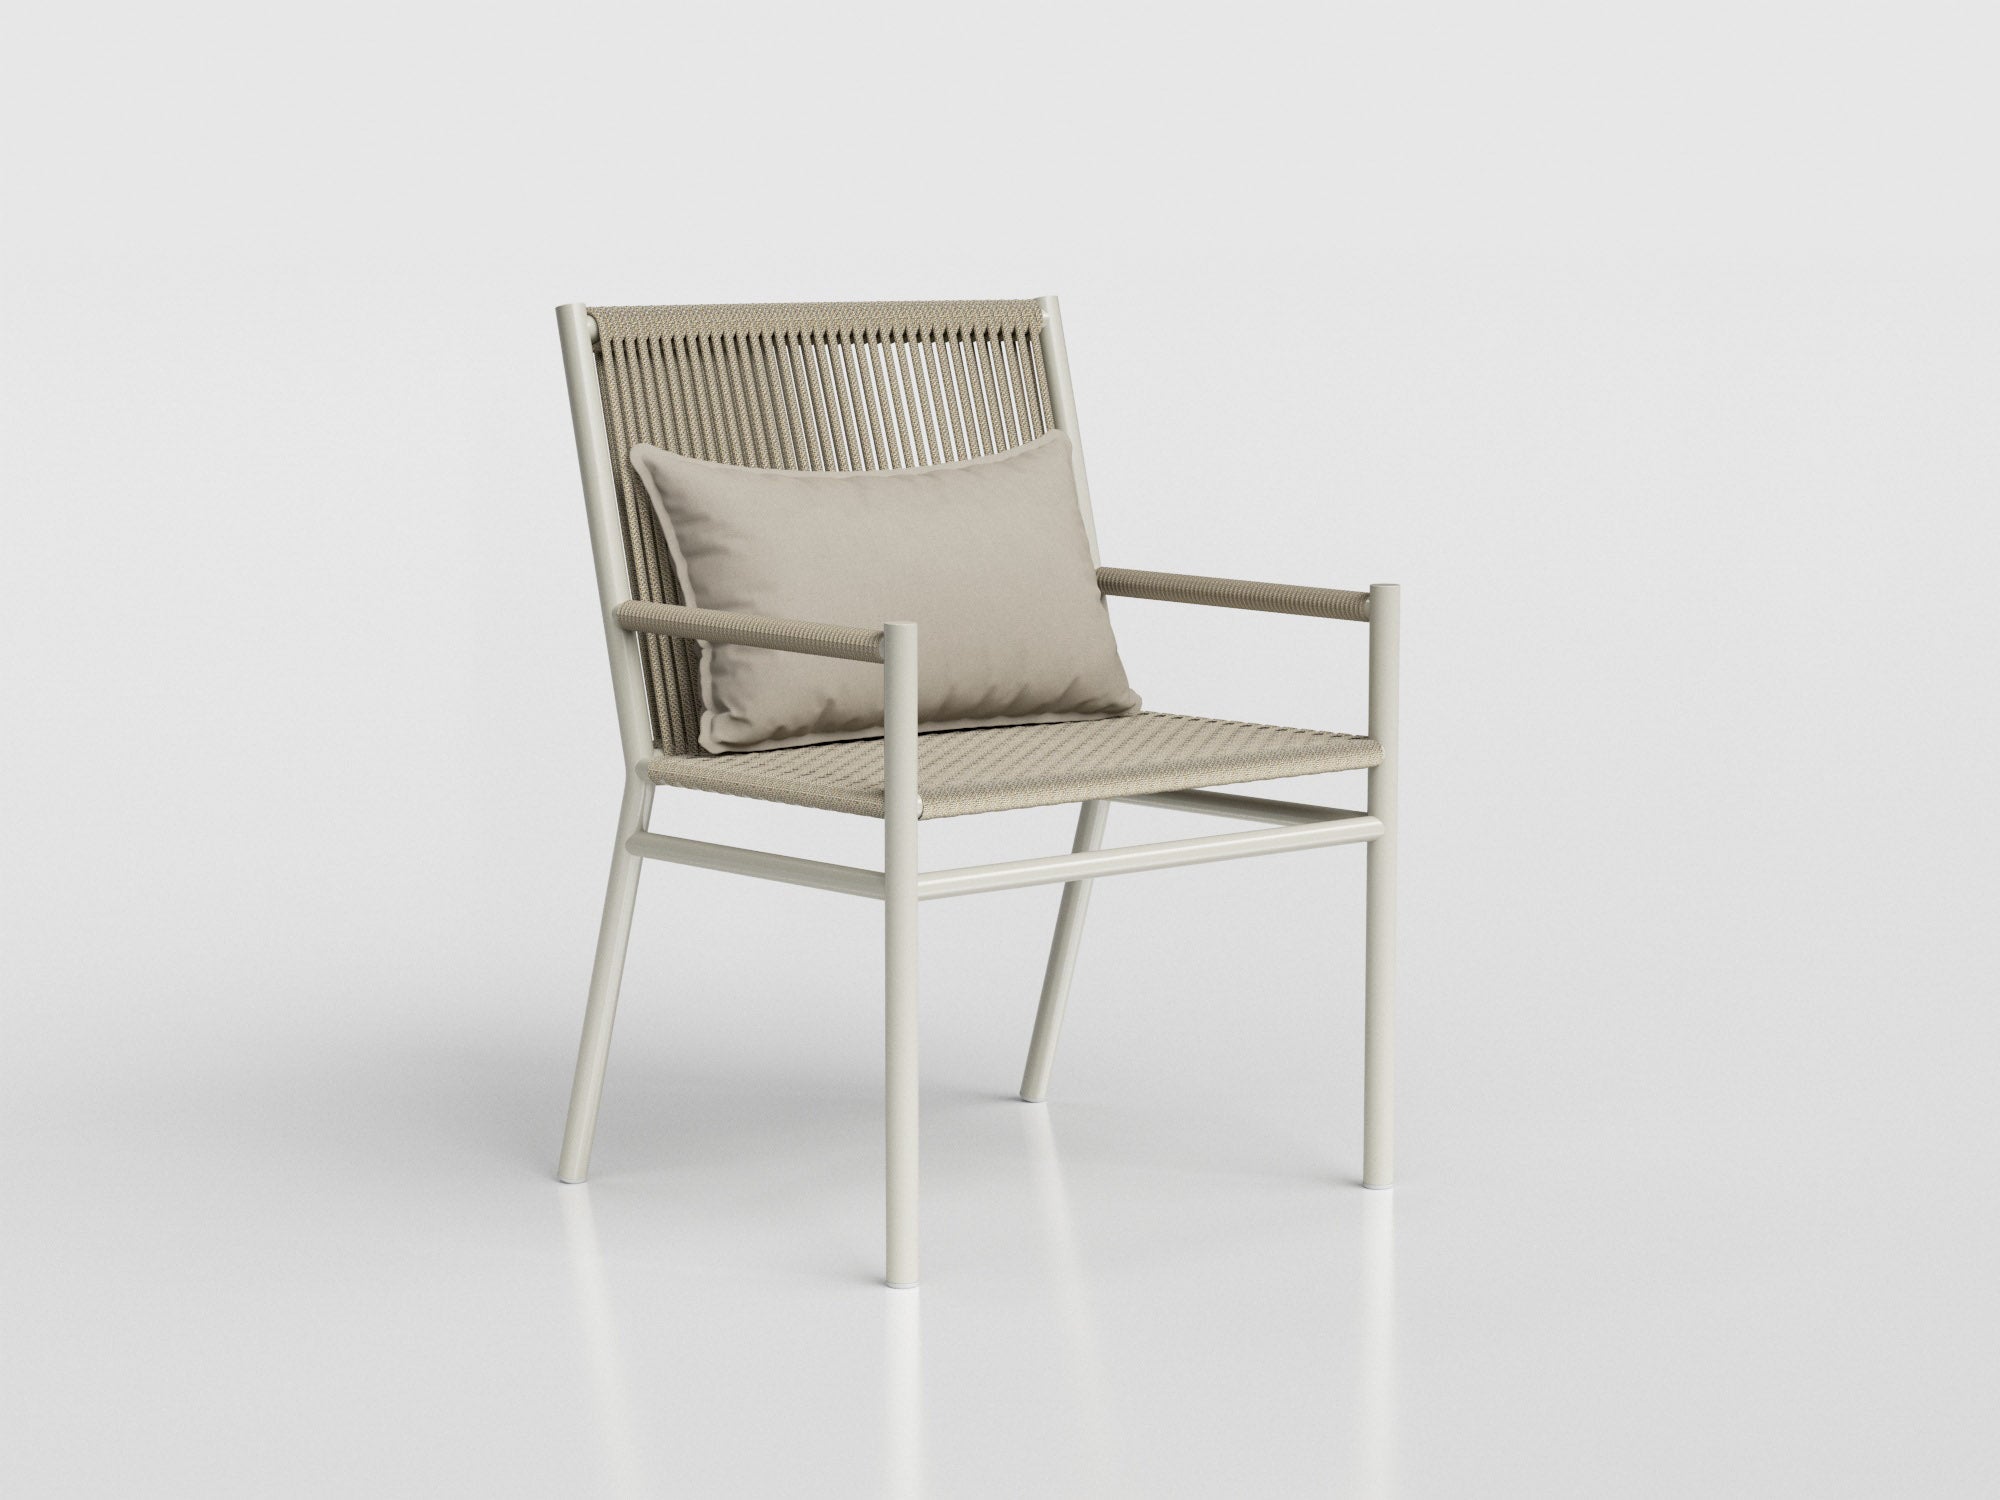 Bora Bora lounge chair made of nautical rope and gray aluminum with back cushion, designed by Luciano Mandelli 